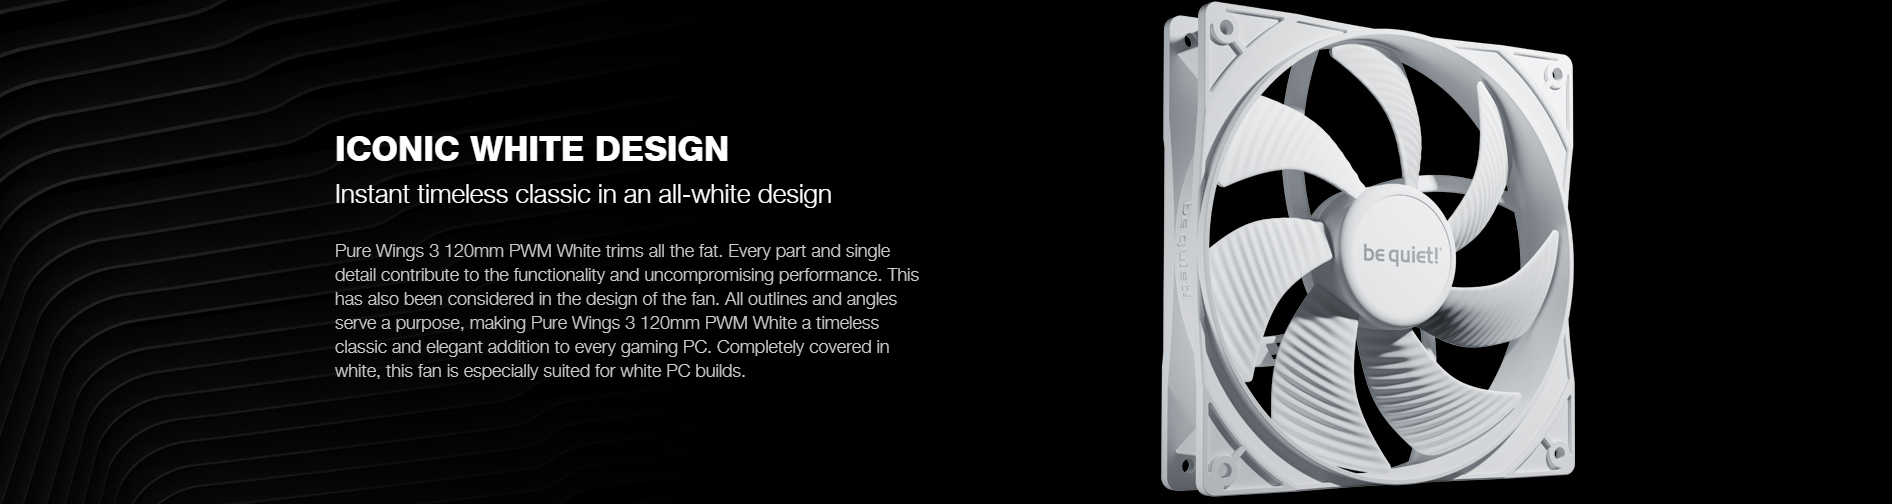 A large marketing image providing additional information about the product be quiet! PURE WINGS 3 120mm PWM Fan - White - Additional alt info not provided